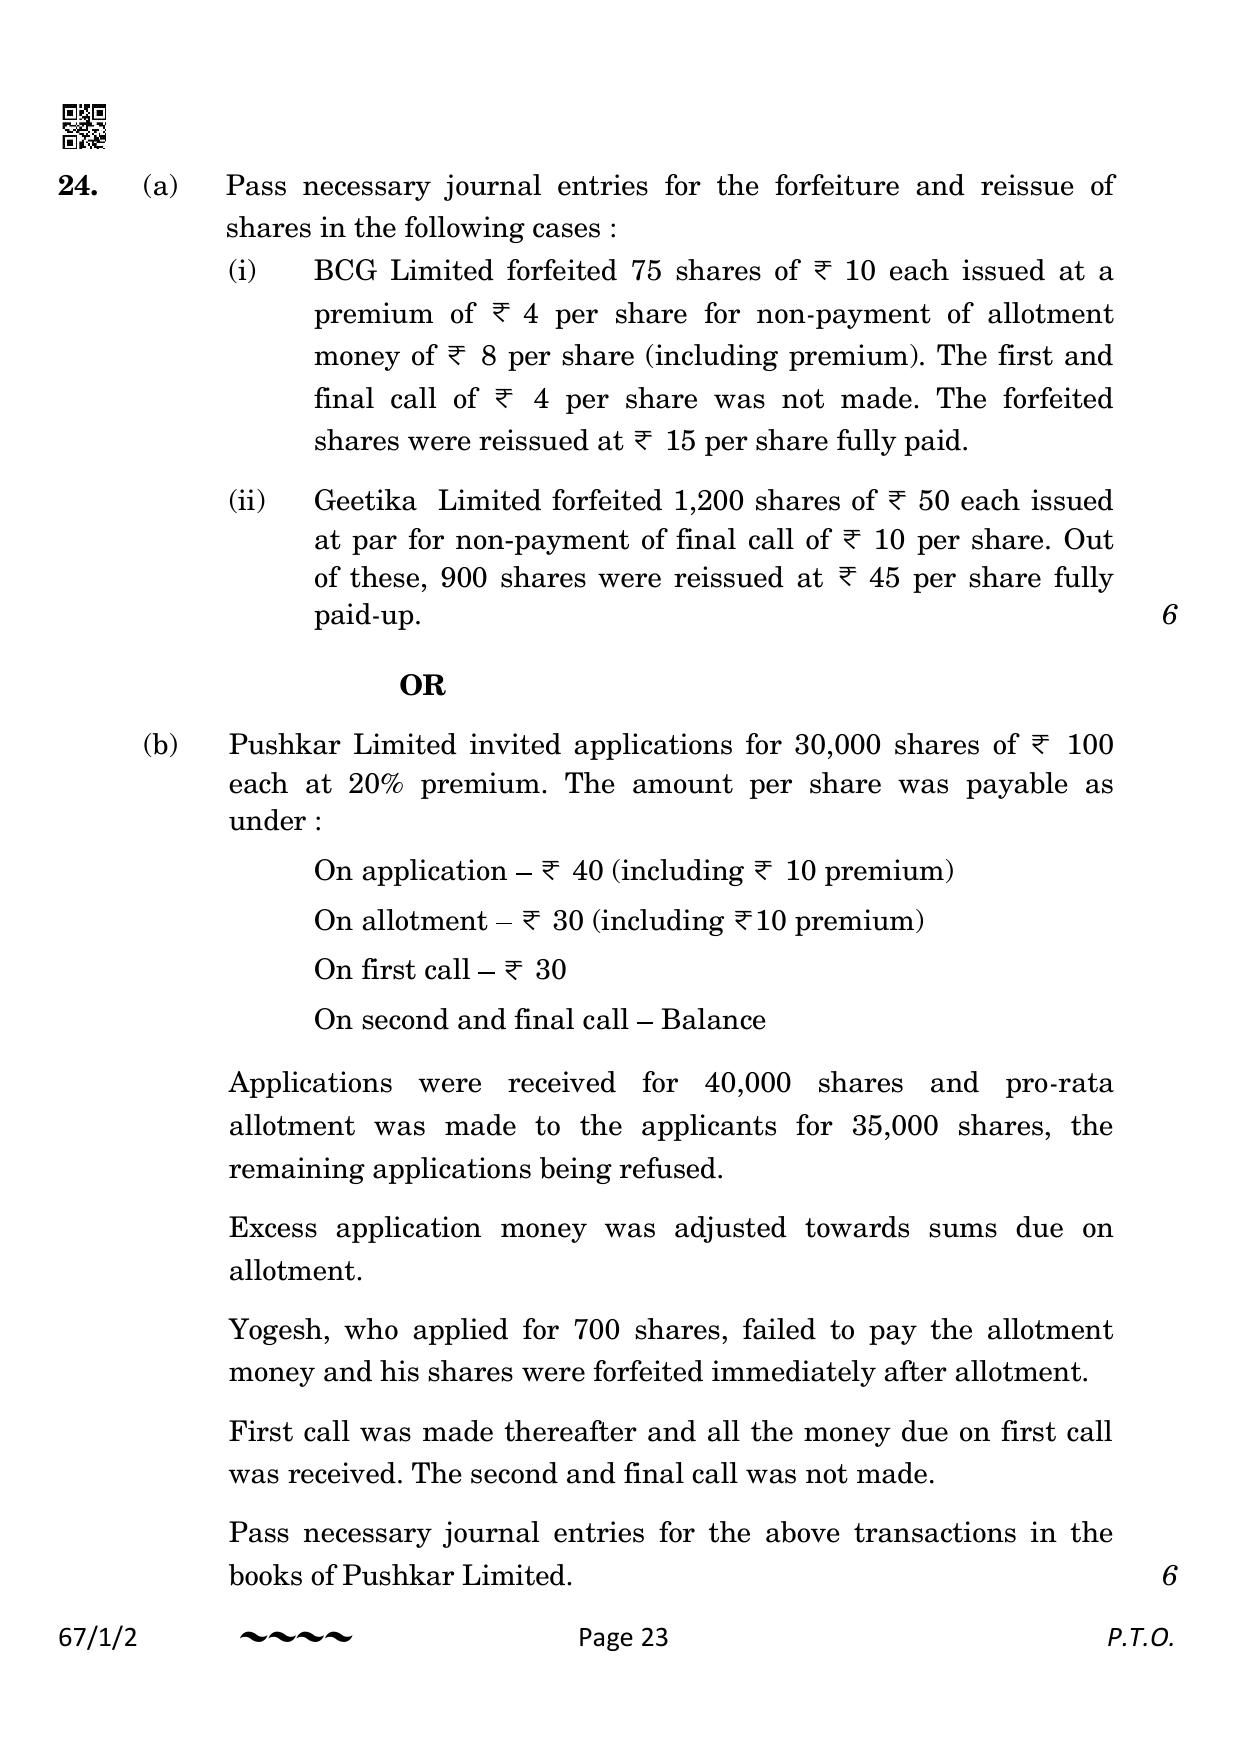 CBSE Class 12 67-1-2 Accountancy 2023 Question Paper - Page 23